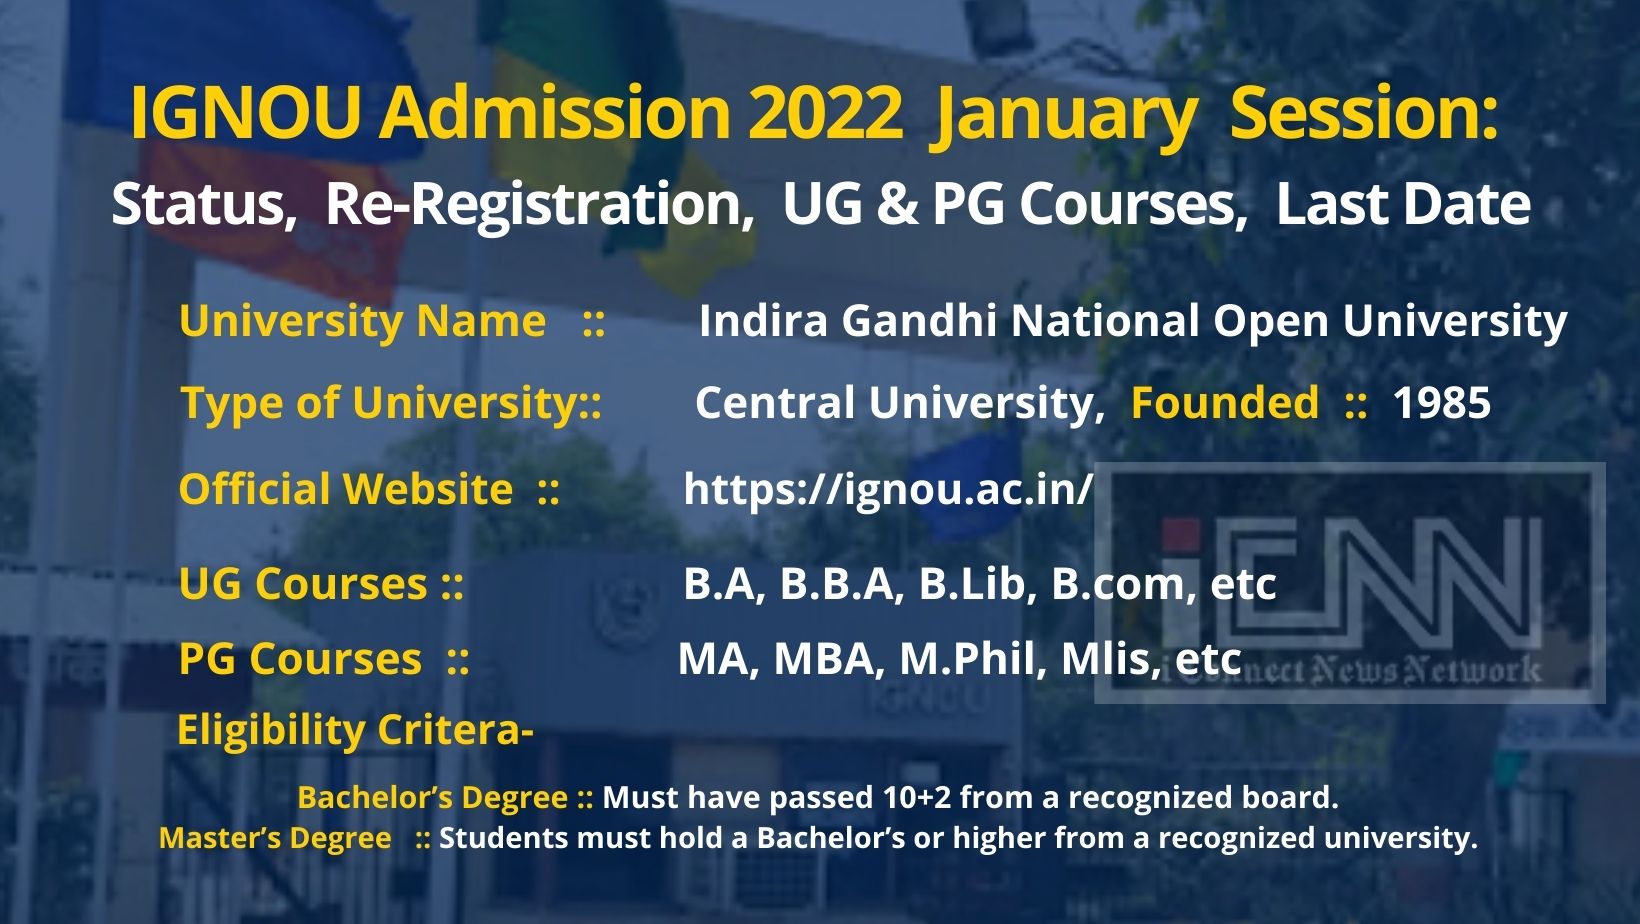 ignou assignment last date january session 2022